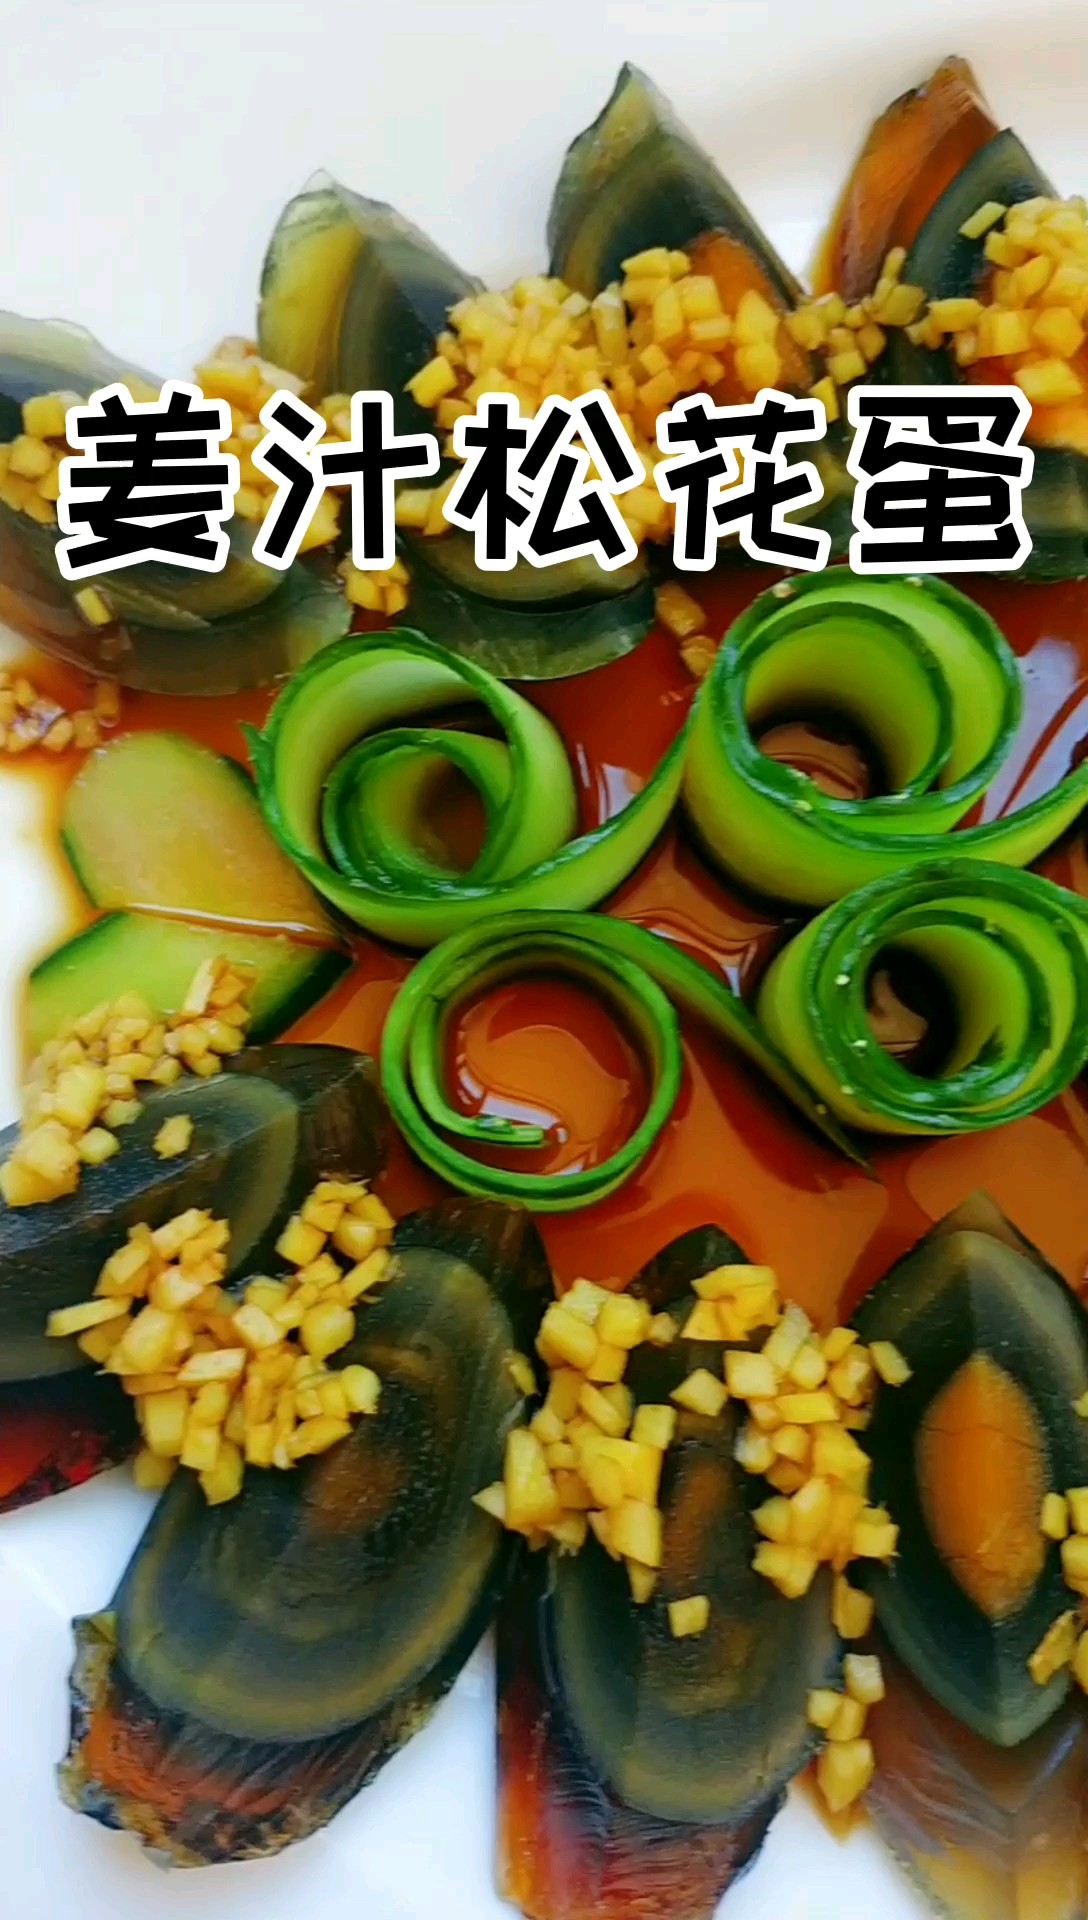 Songhua Eggs with Sauce